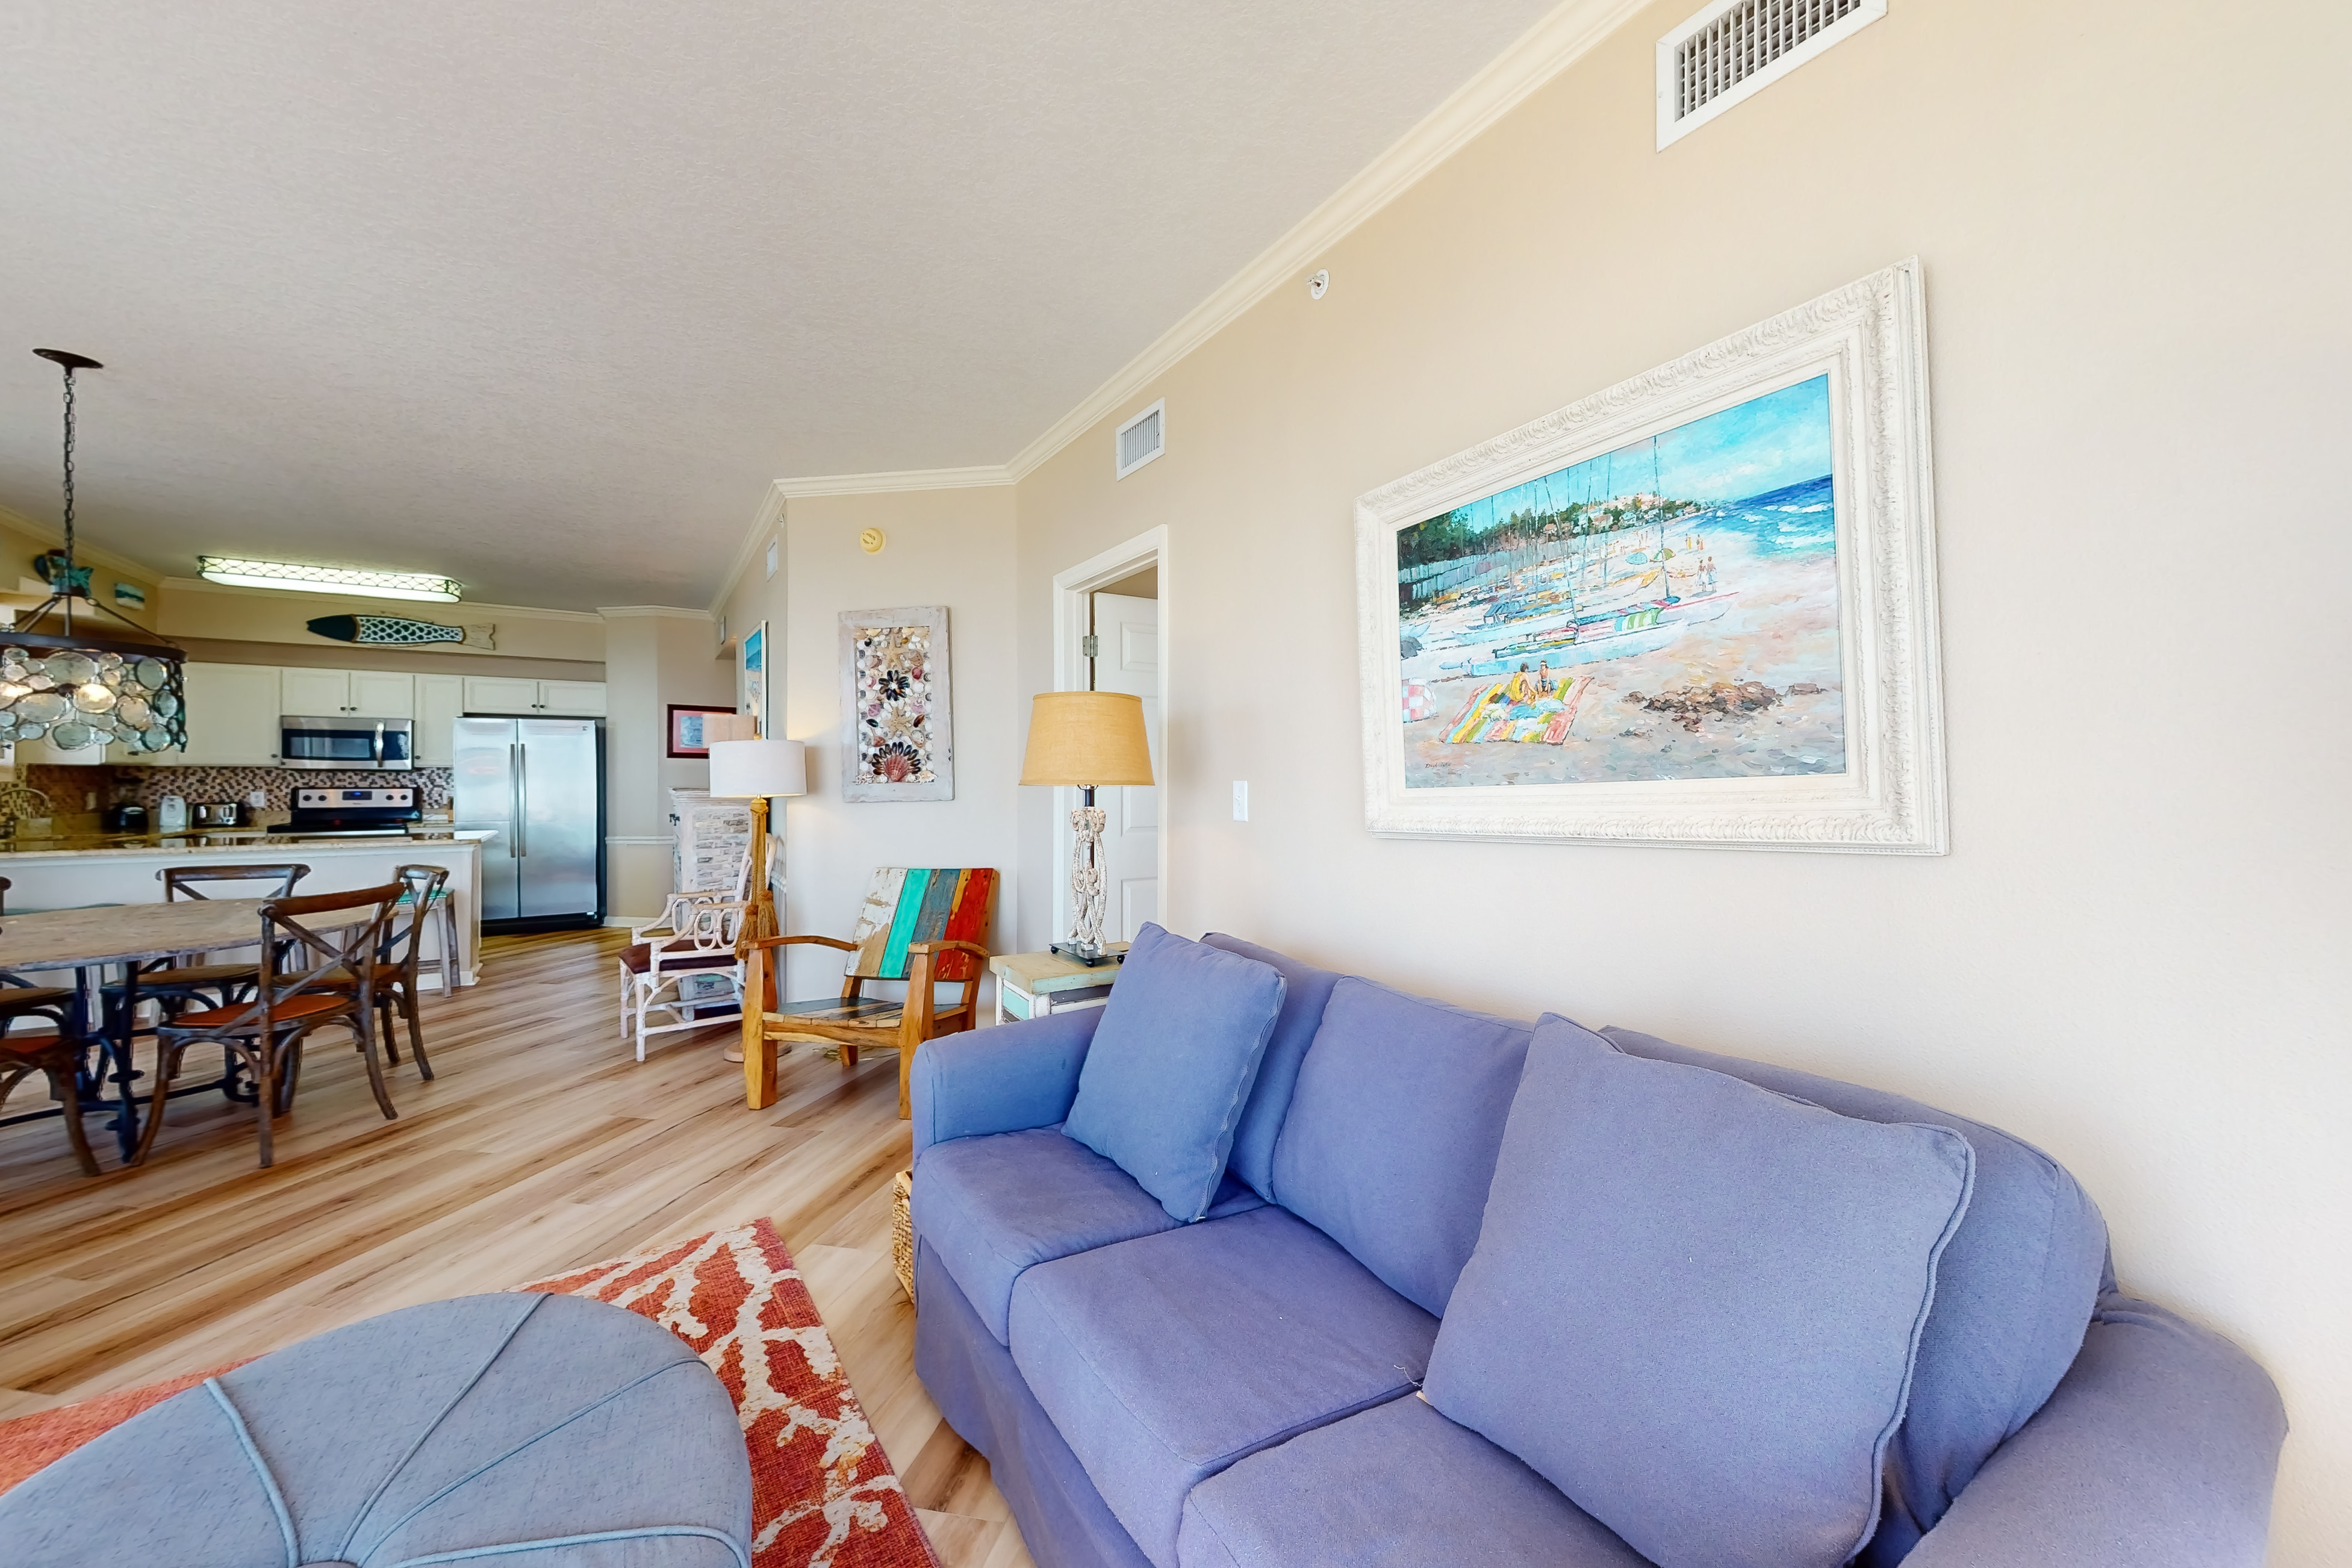 Dunes of Seagrove A209 Condo rental in Dunes of Seagrove in Highway 30-A Florida - #3